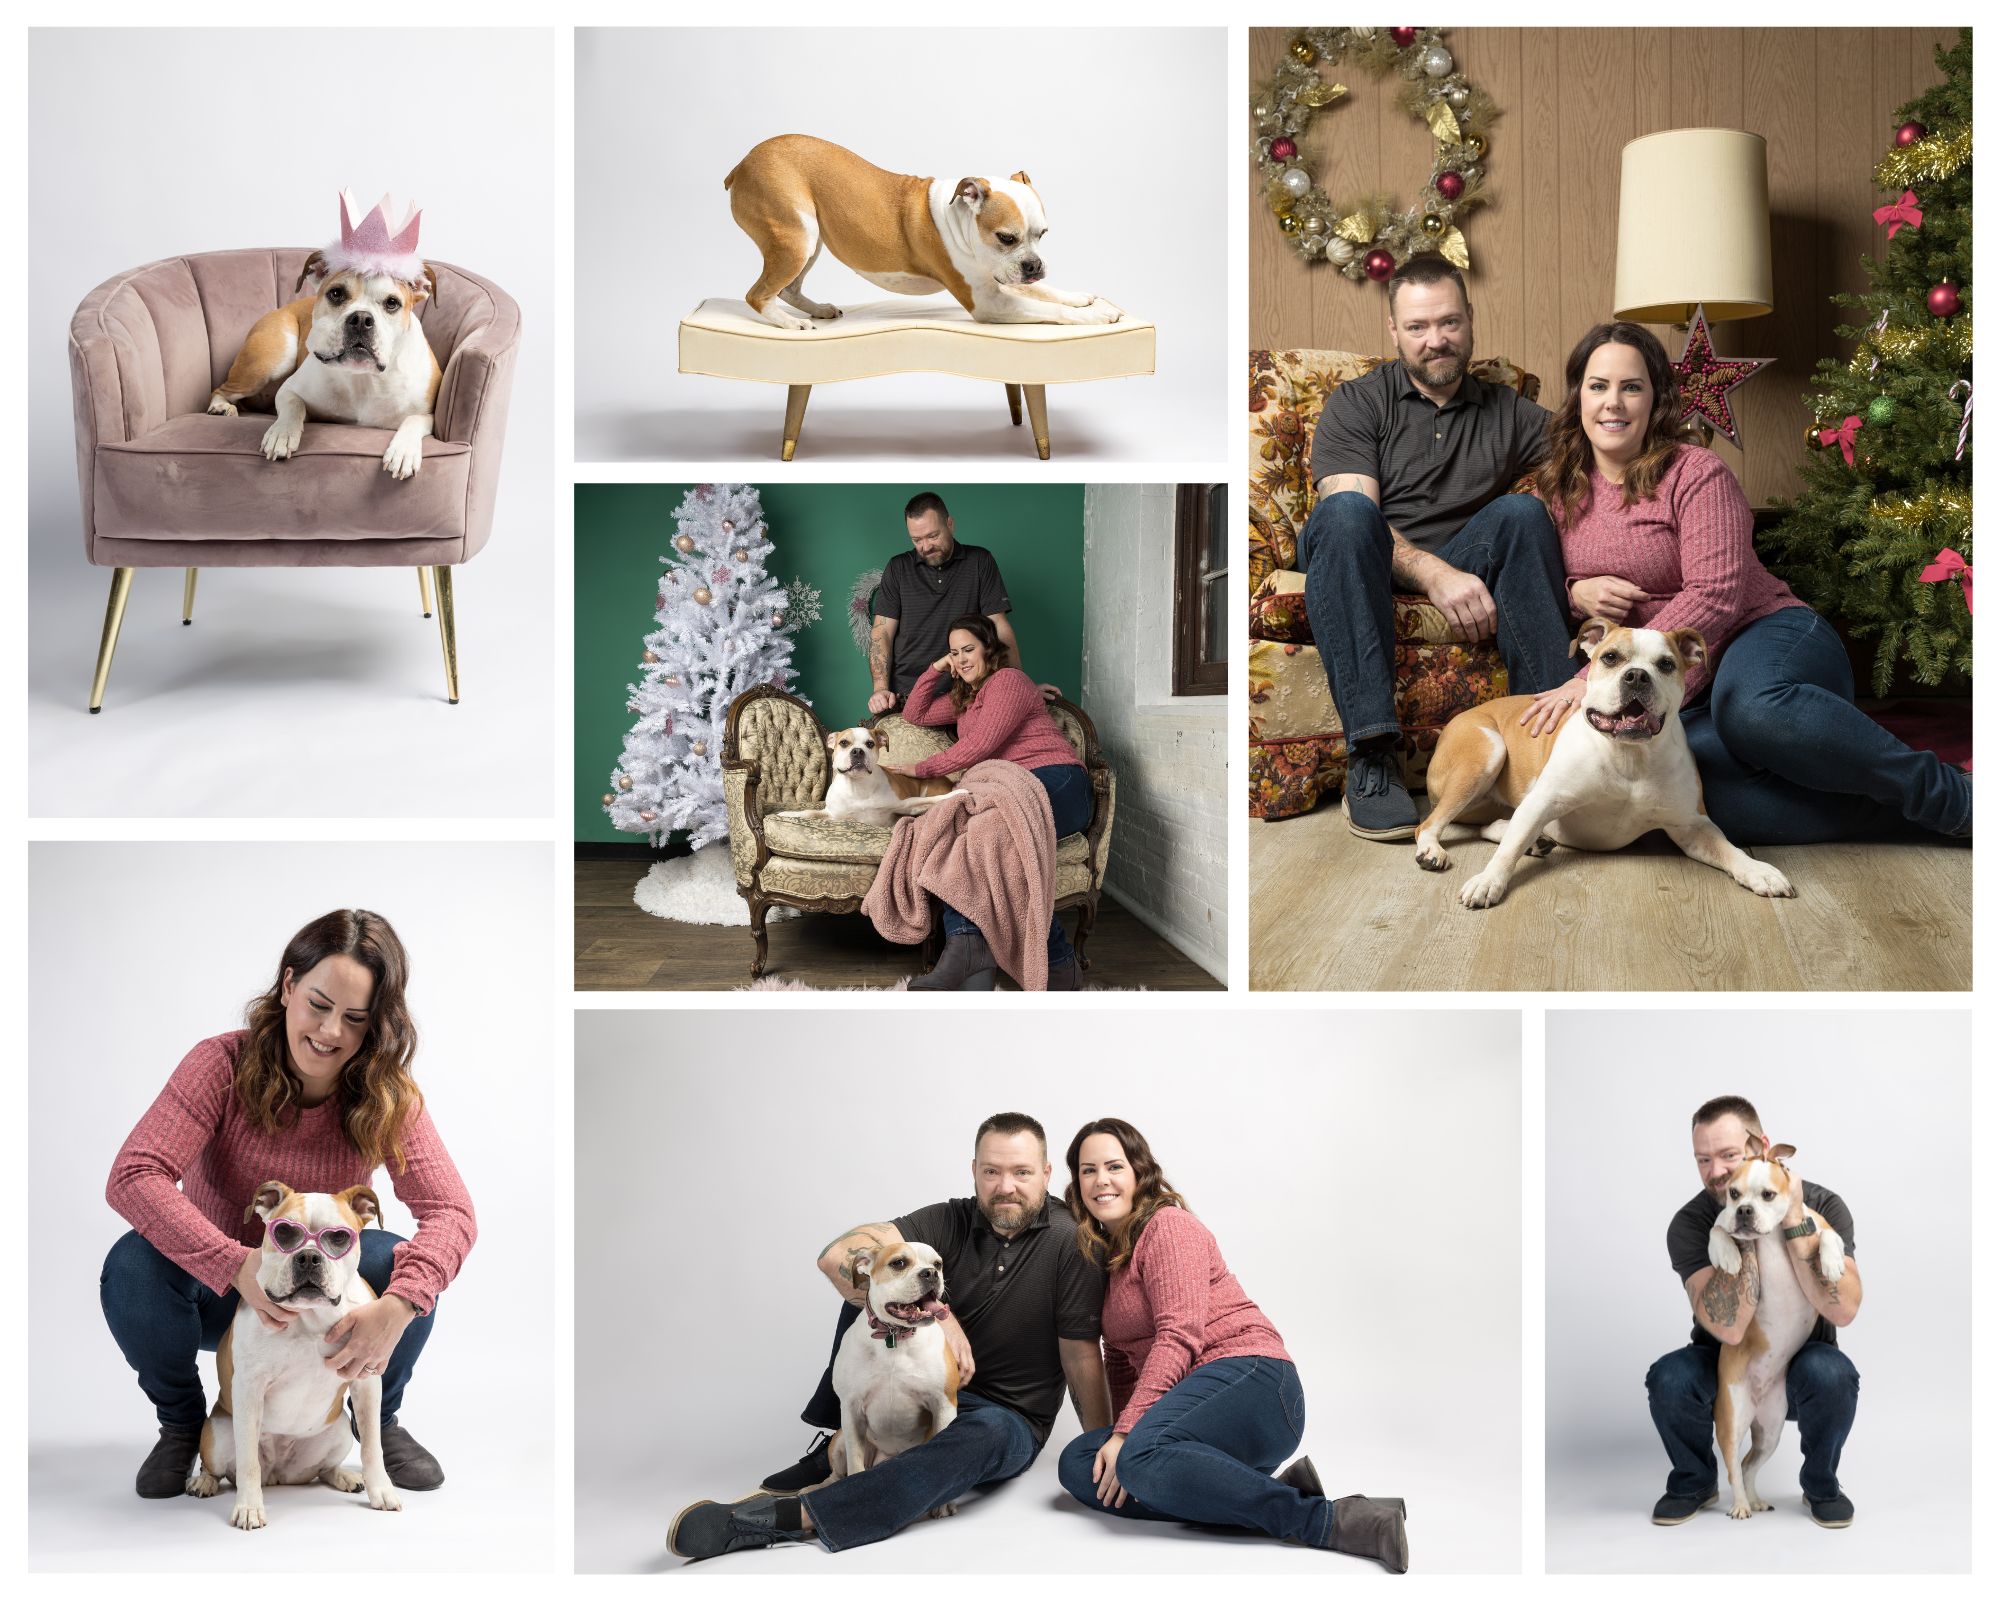 End of life pet photography -- a series of images with a bulldog and her human mom and dad